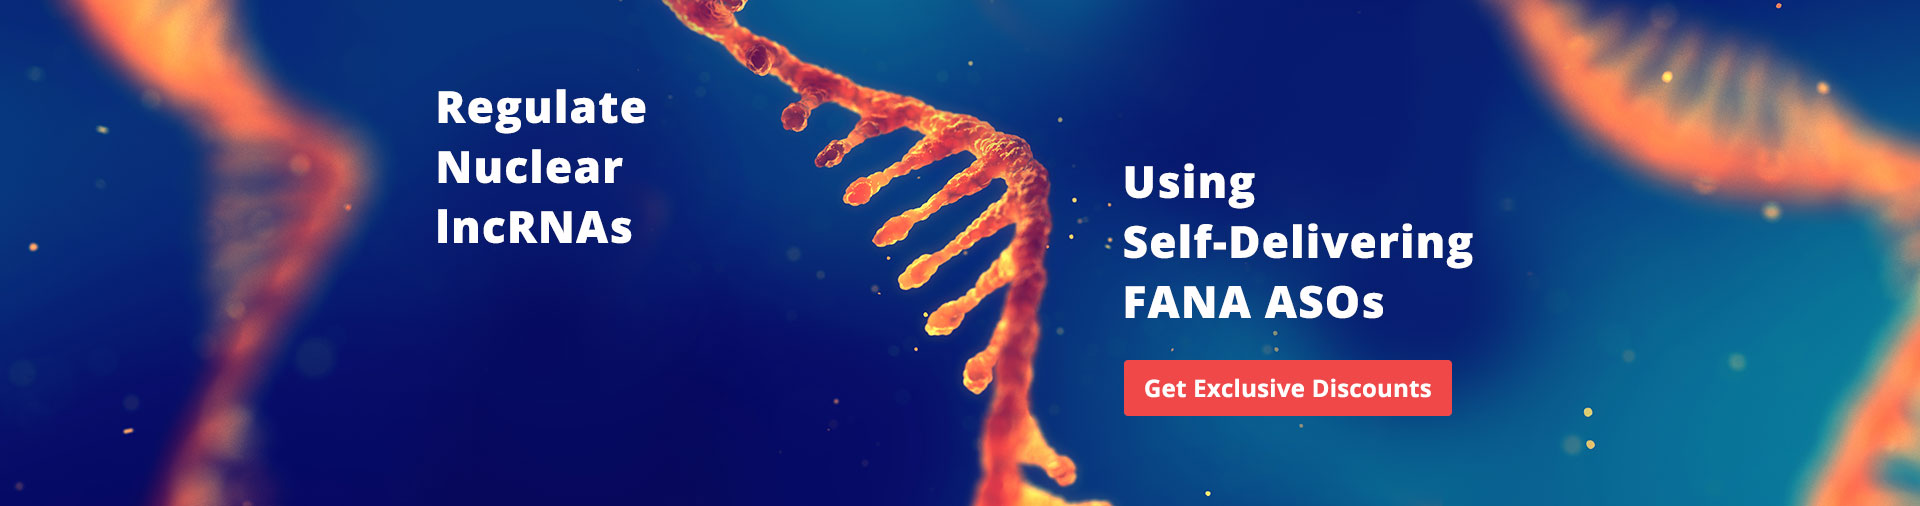 Regulate Nuclear IncRNAs Using Self-Delivering FANA ASOs